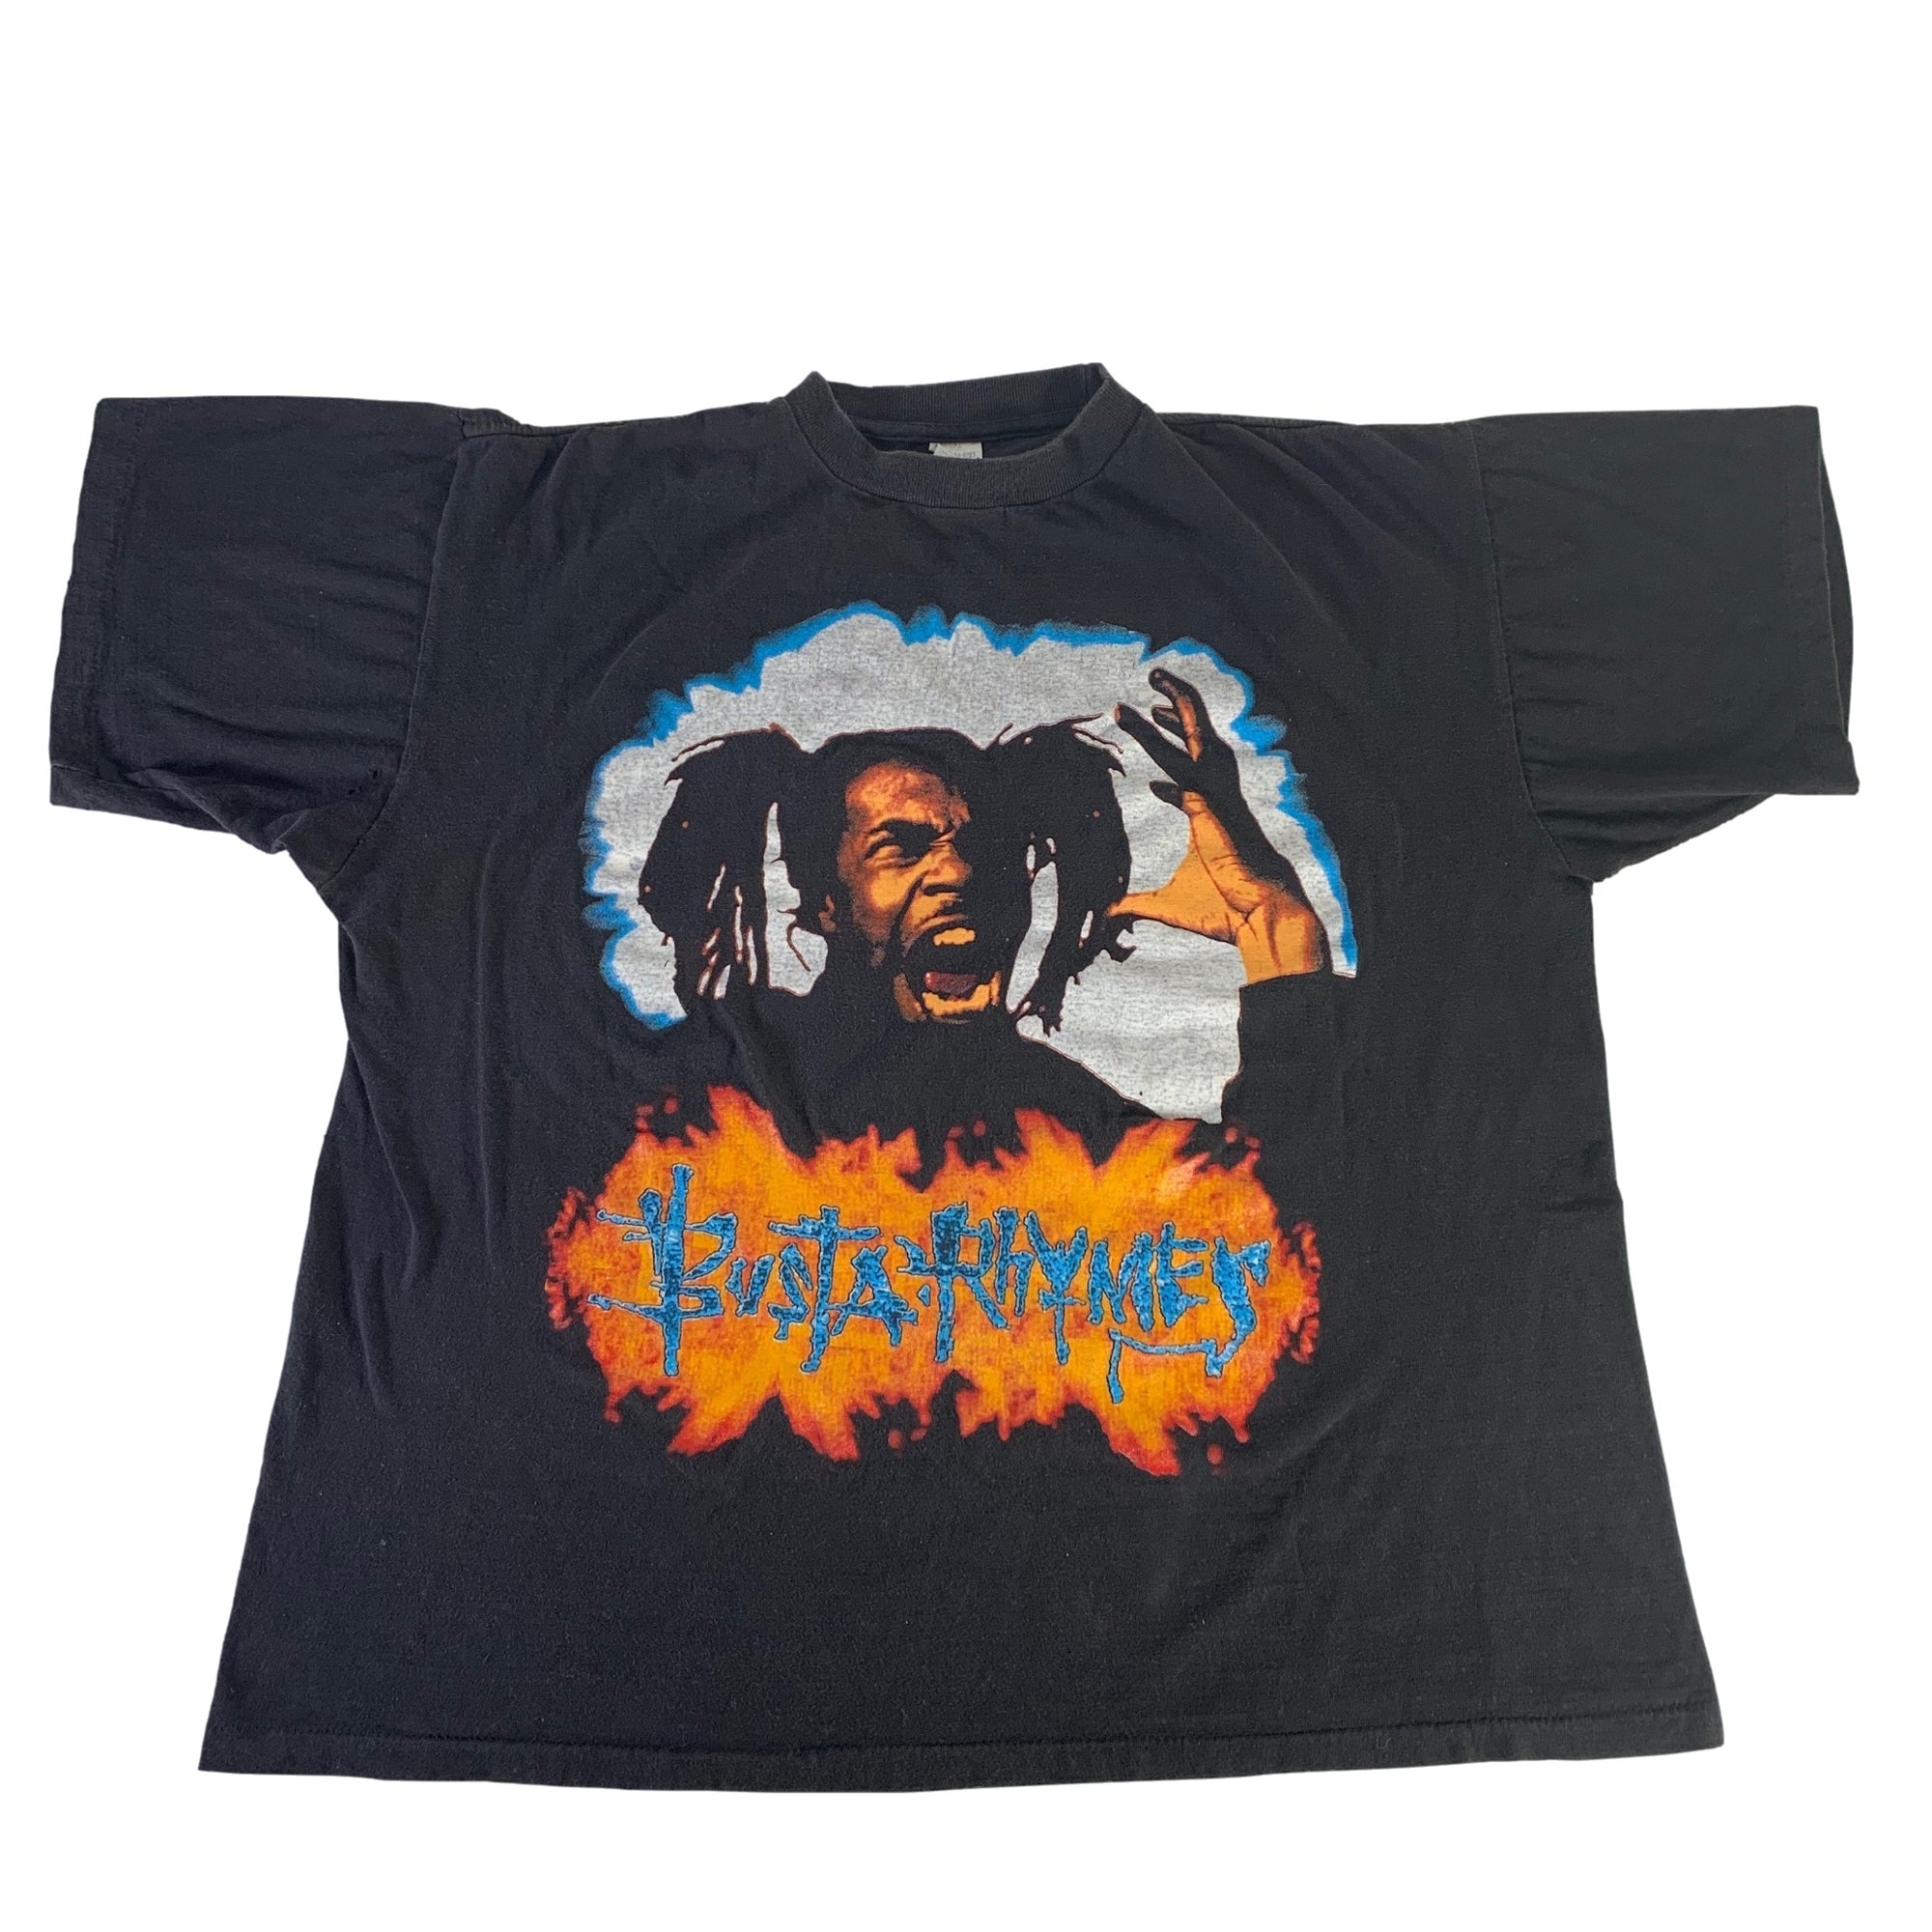 Vintage Busta Rhymes "Got You All In Check" T-Shirt - jointcustodydc